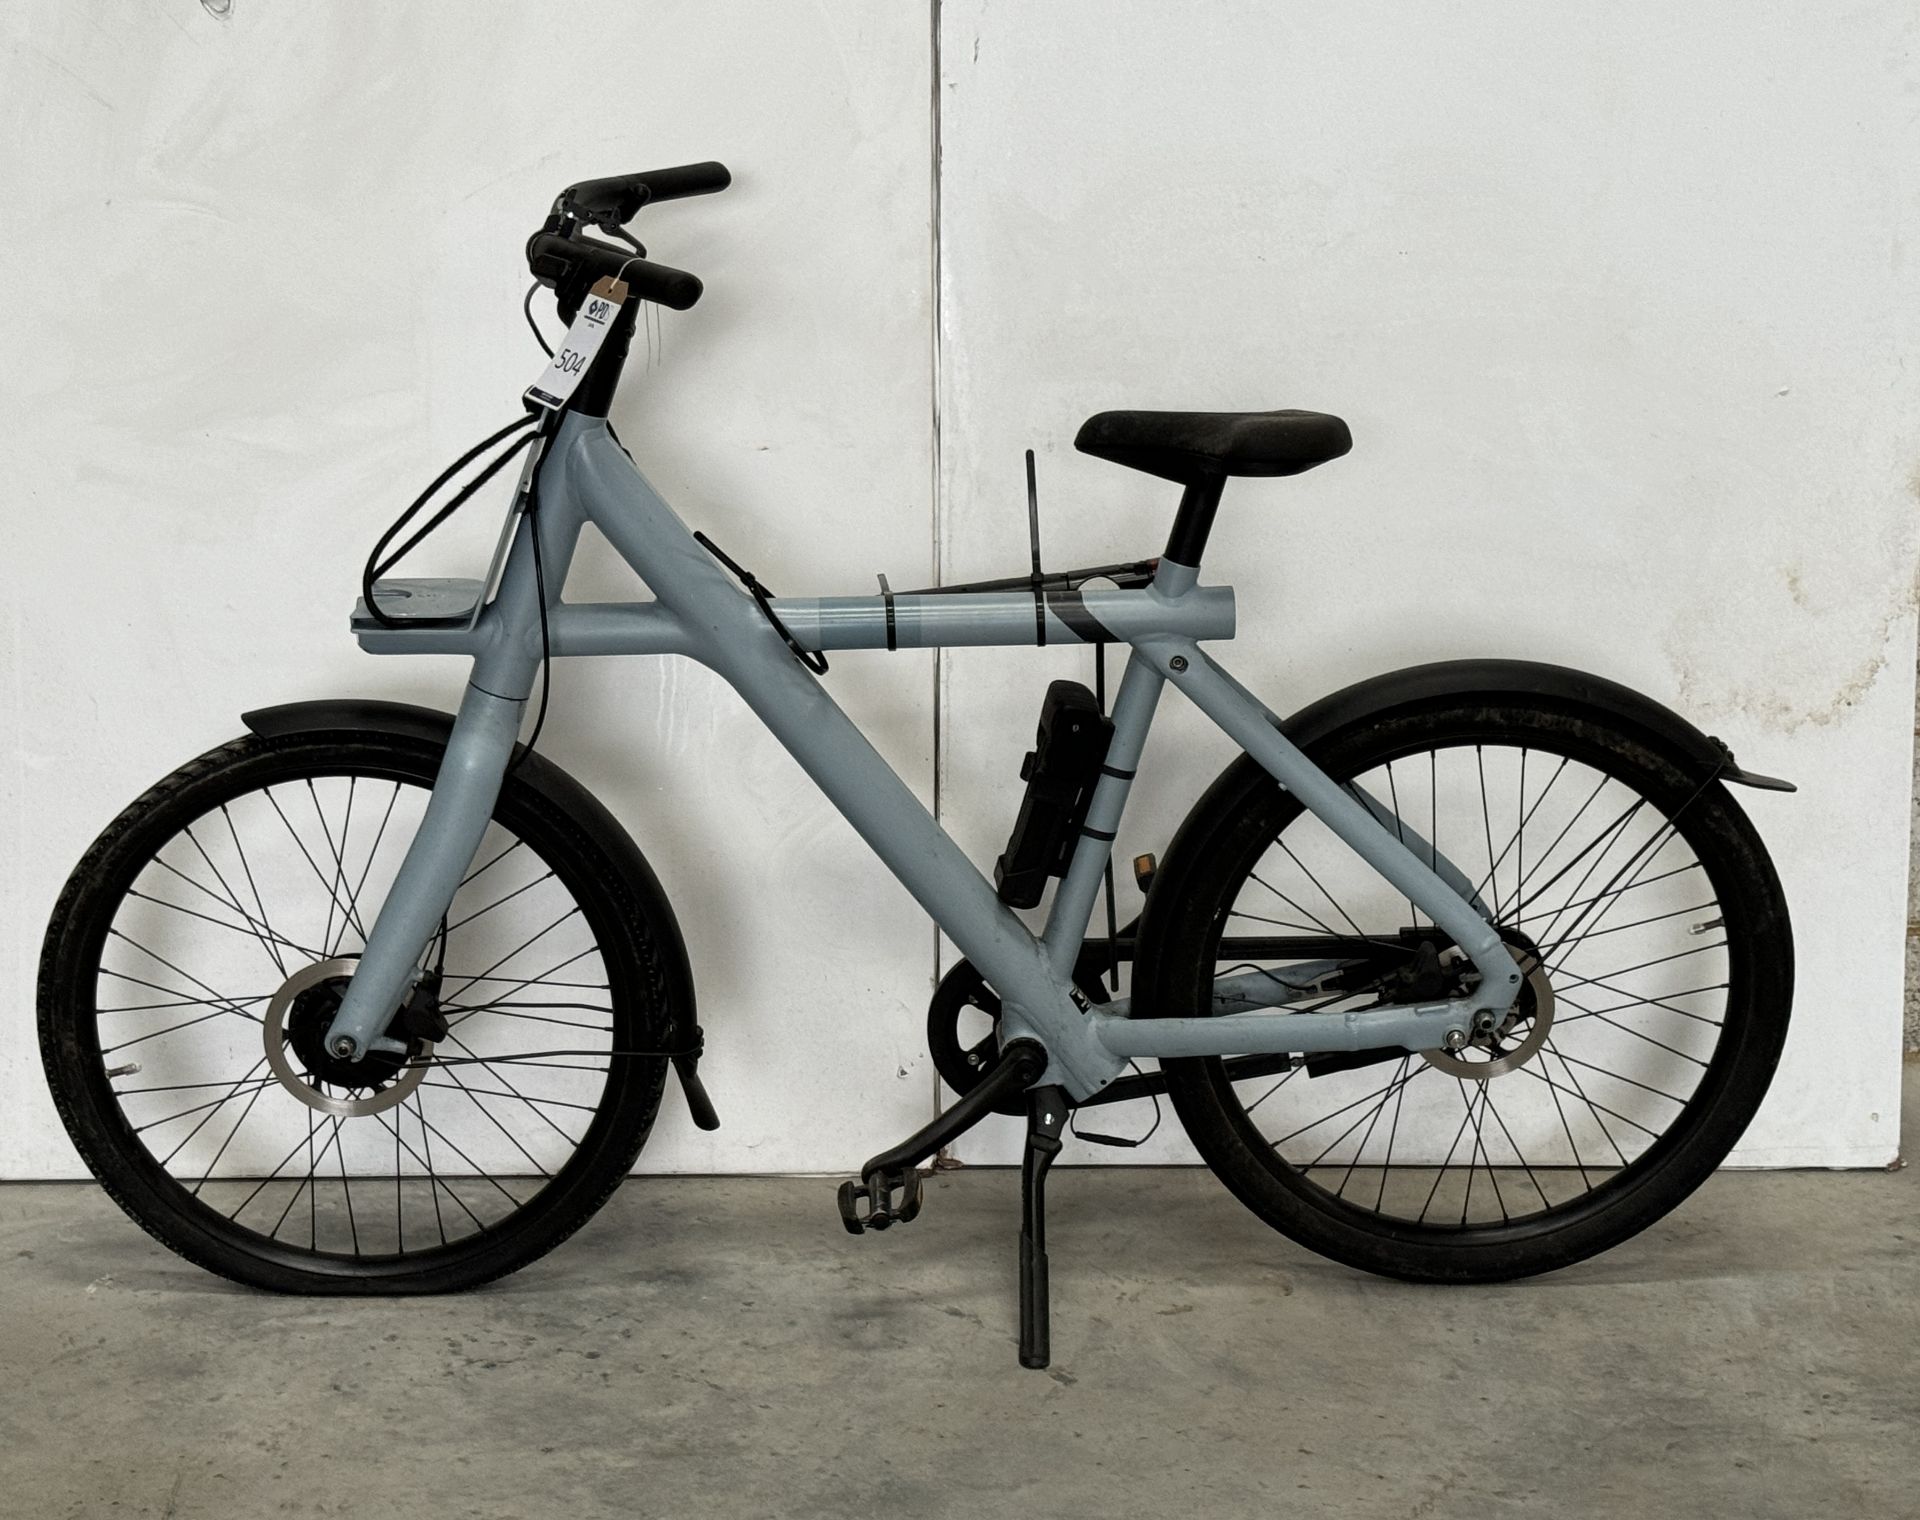 VanMoof X3 Electric Bike, Frame Number ASY4113420 (NOT ROADWORTHY - FOR SPARES ONLY) (No codes